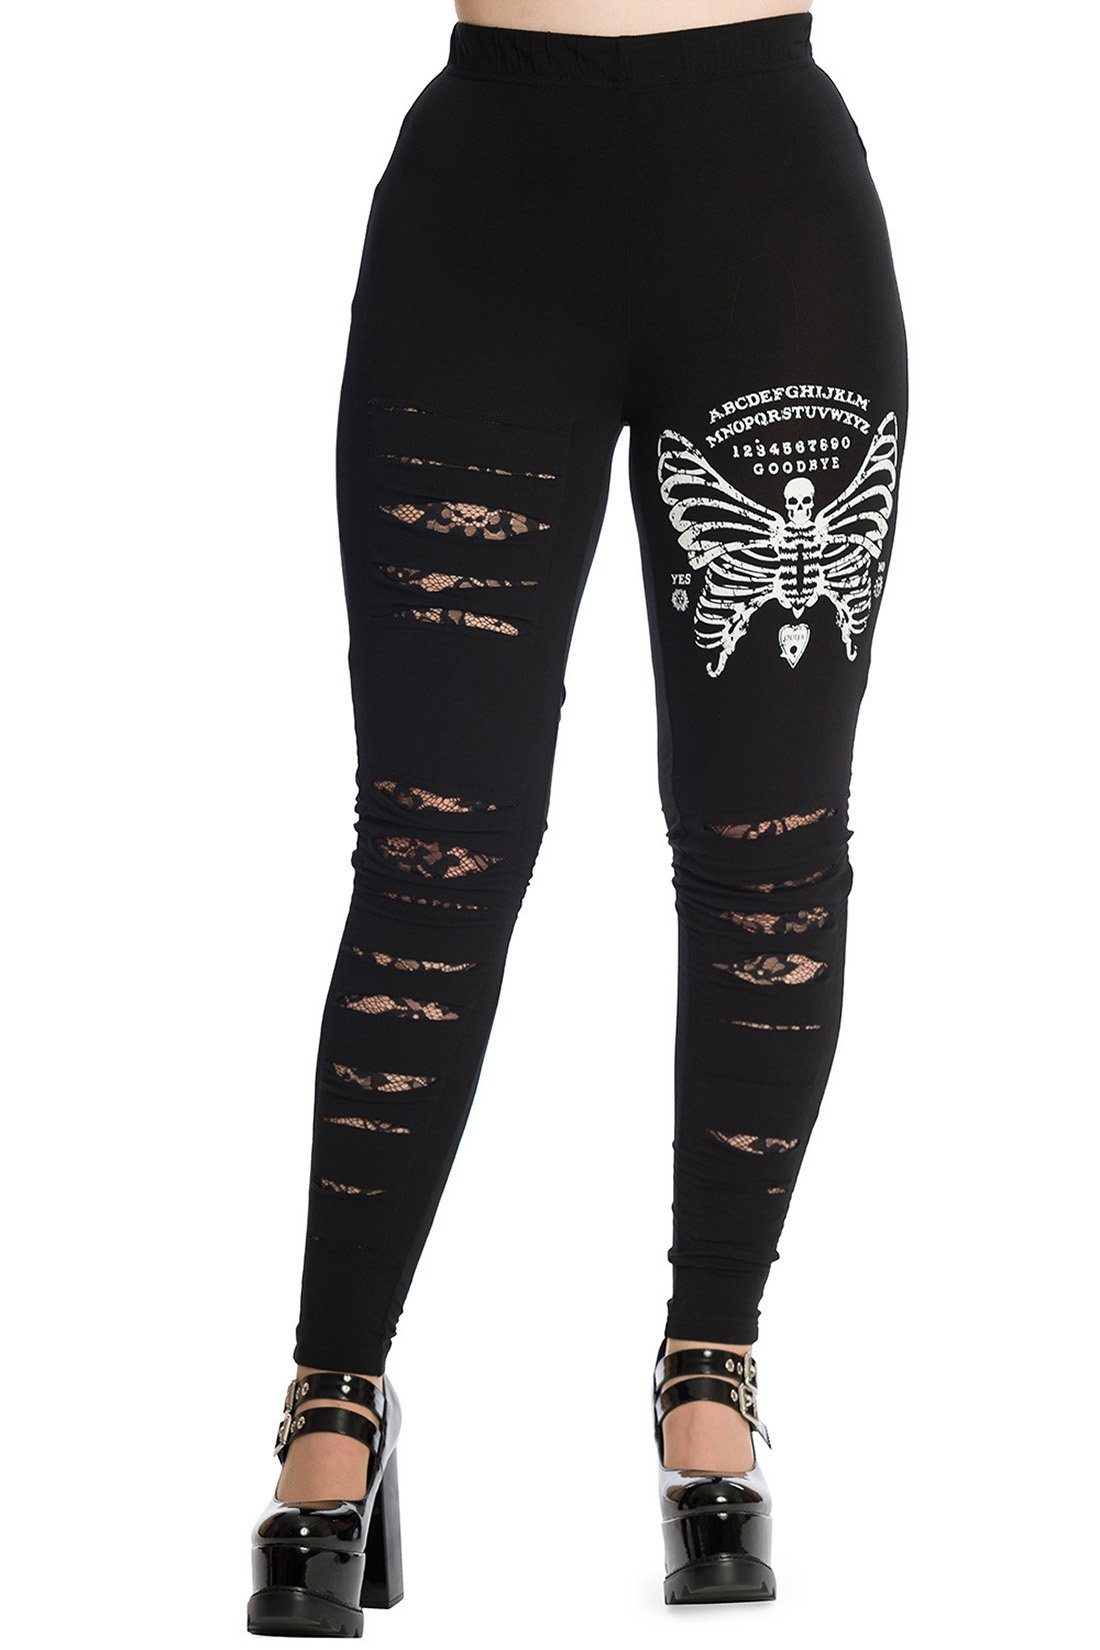 Banned Leggings Skeleton Butterfly Gothic Distressed Spitze